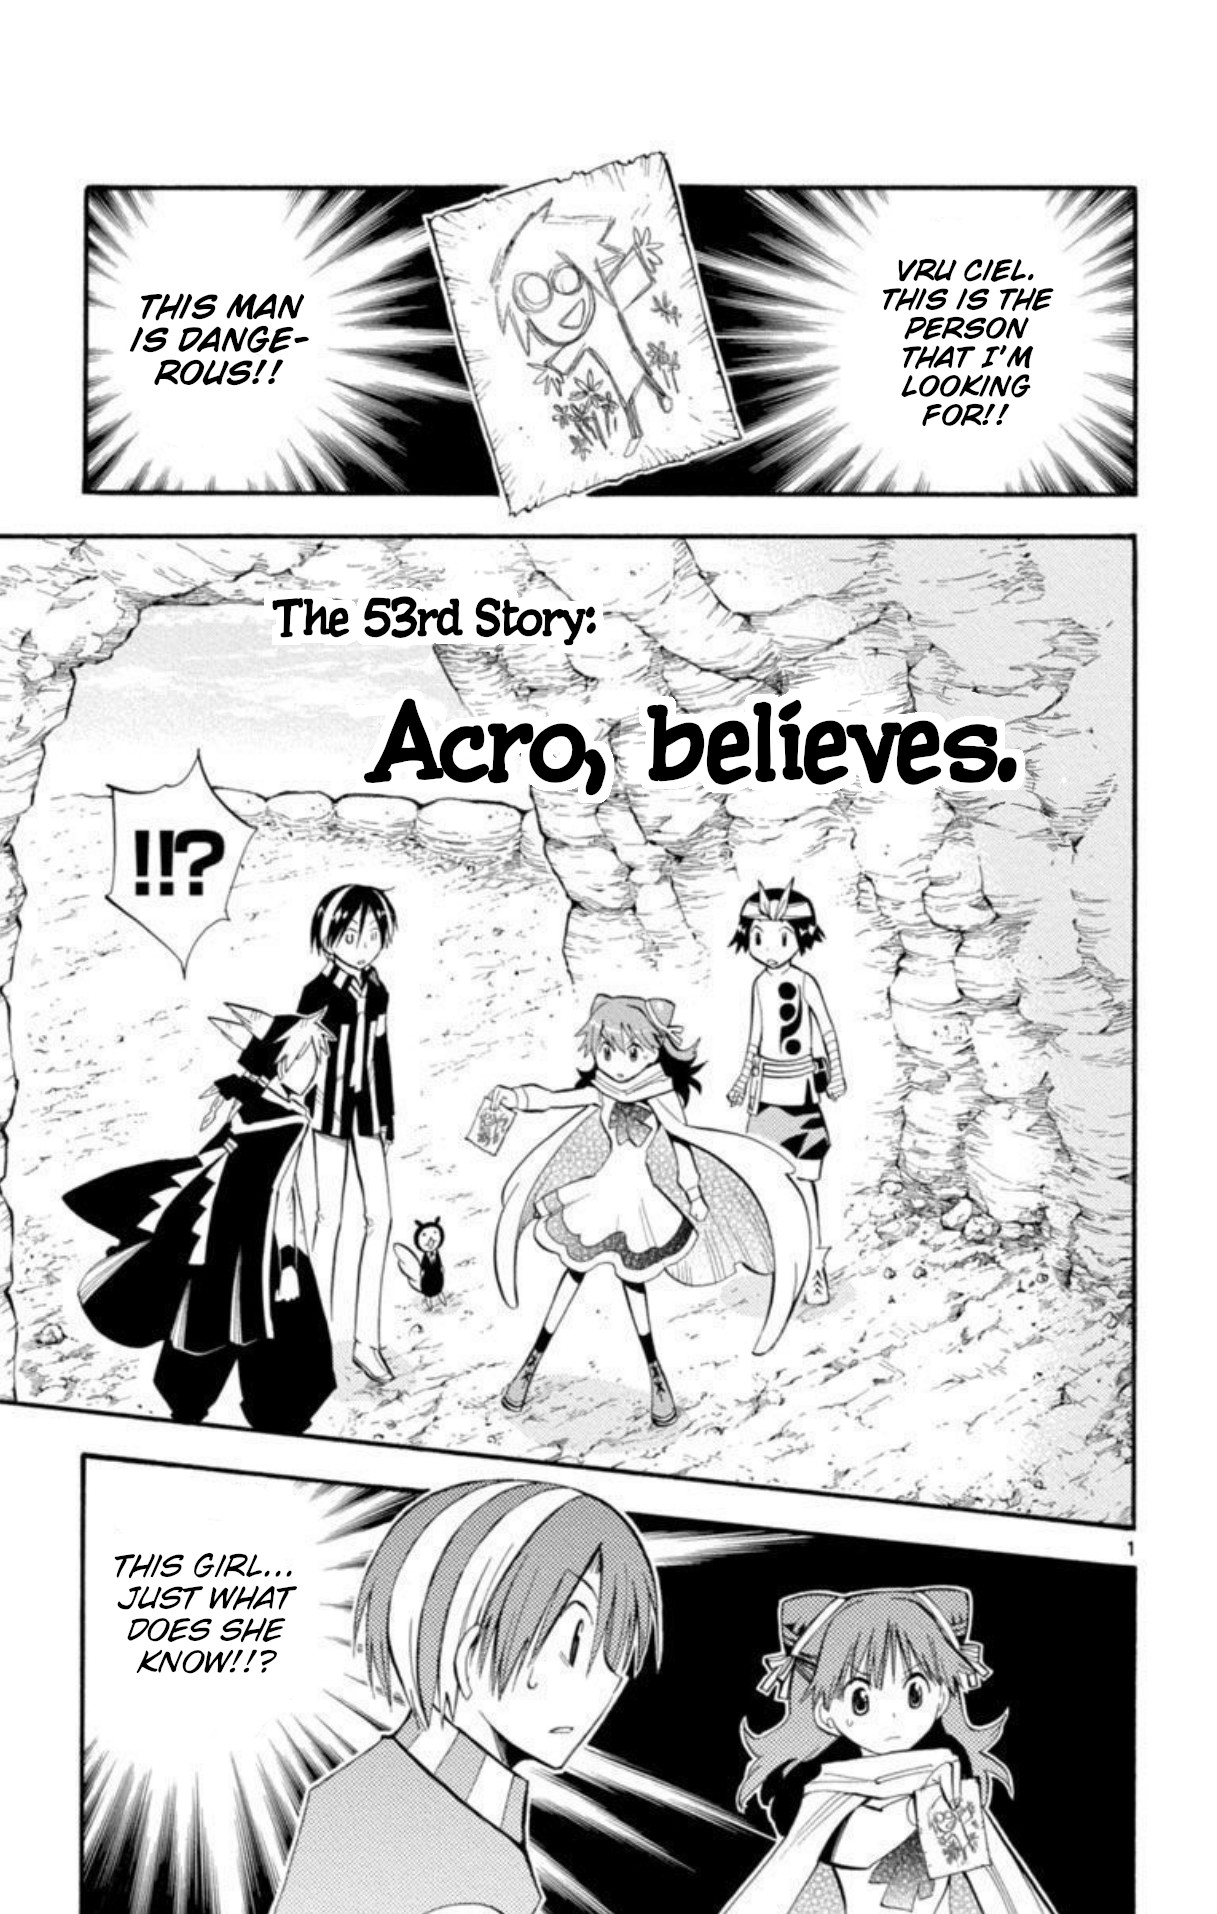 Artist Acro Vol.6 Chapter 53: Acro, Believes - Picture 1